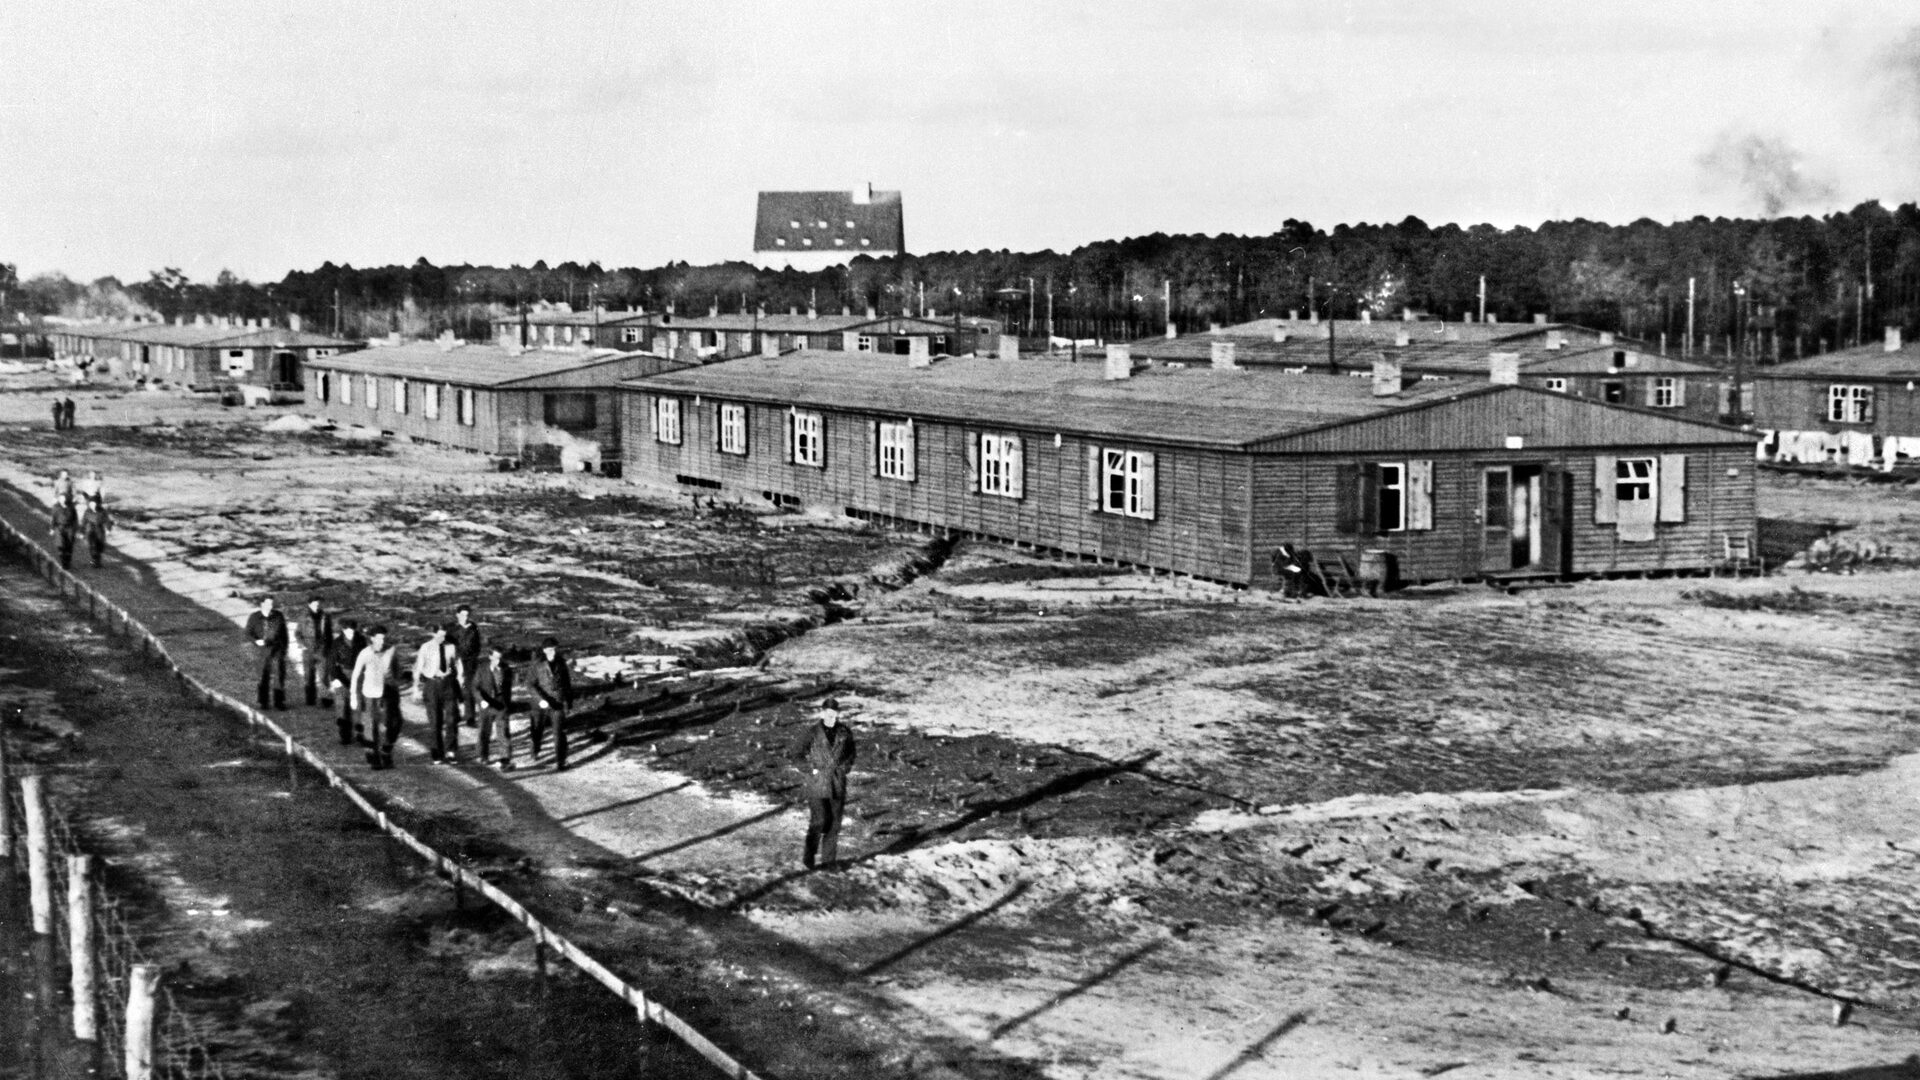 German POW camp Stalag Luft III was the scene of numerous escape attempts, and Bill Ash was a continuing thorn in the side of his Nazi captors throughout World War II.